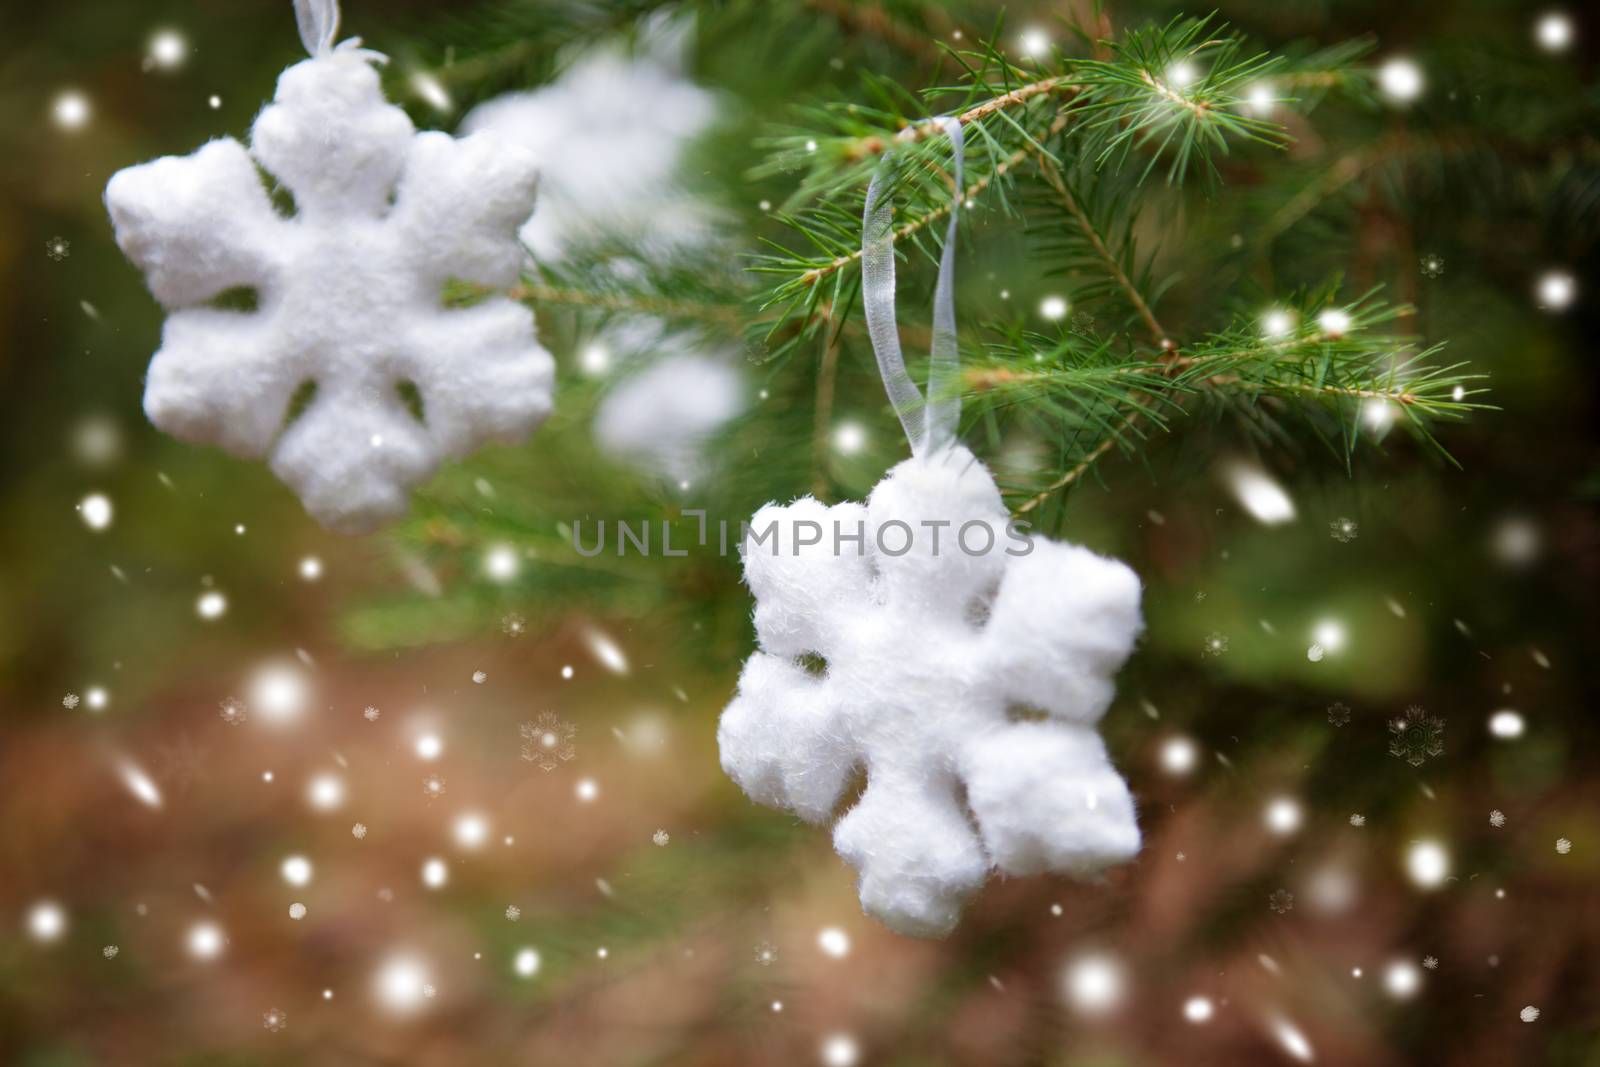 Snowflake on a Christmas tree by supercat67